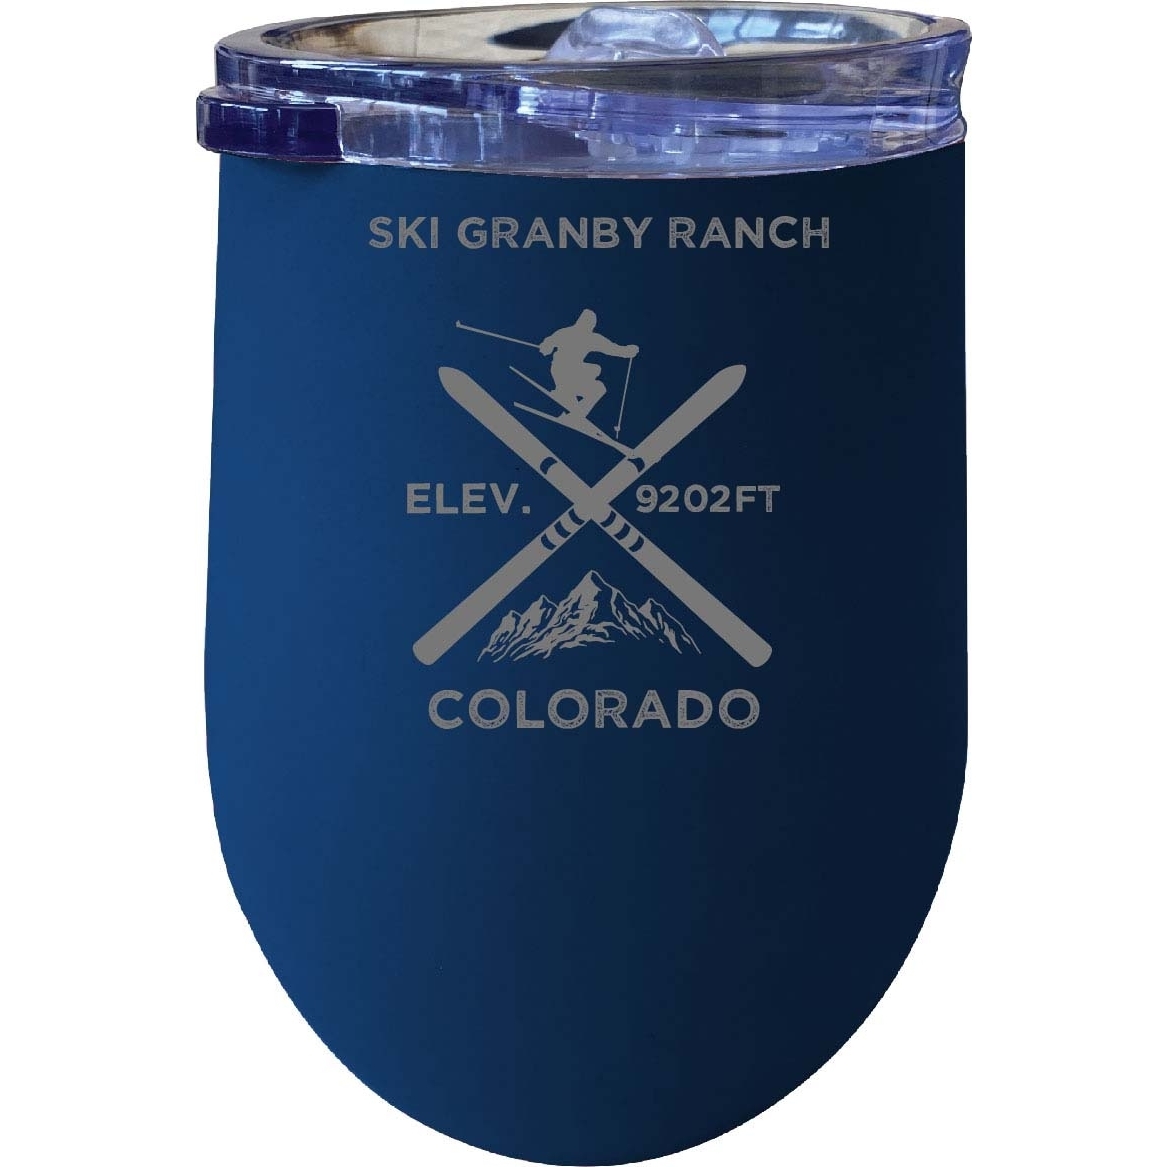 Ski Granby Ranch Colorado Ski Souvenir 12 Oz Laser Etched Insulated Wine Stainless Steel Tumbler - Navy